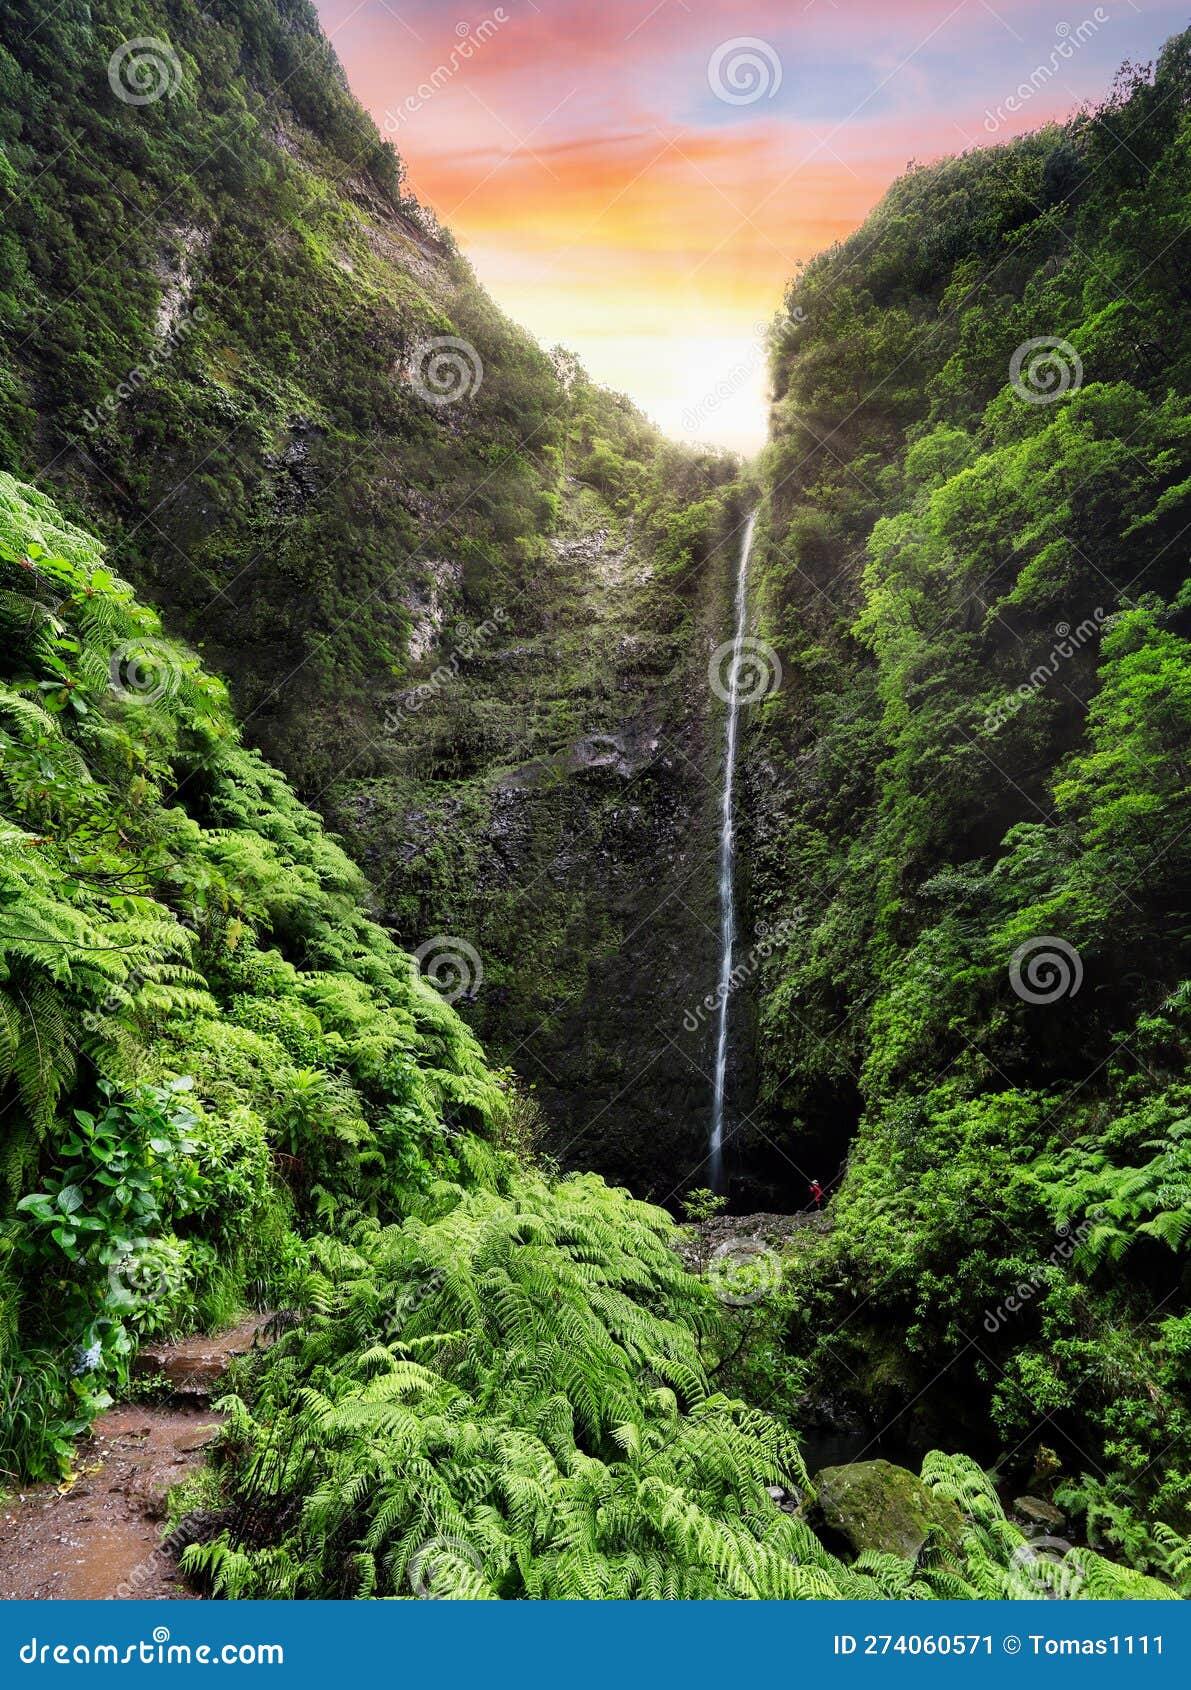 hiking path with forest in levada do caldeirao verde waterfall trail - tropical scenery on madeira island, santana, portugal